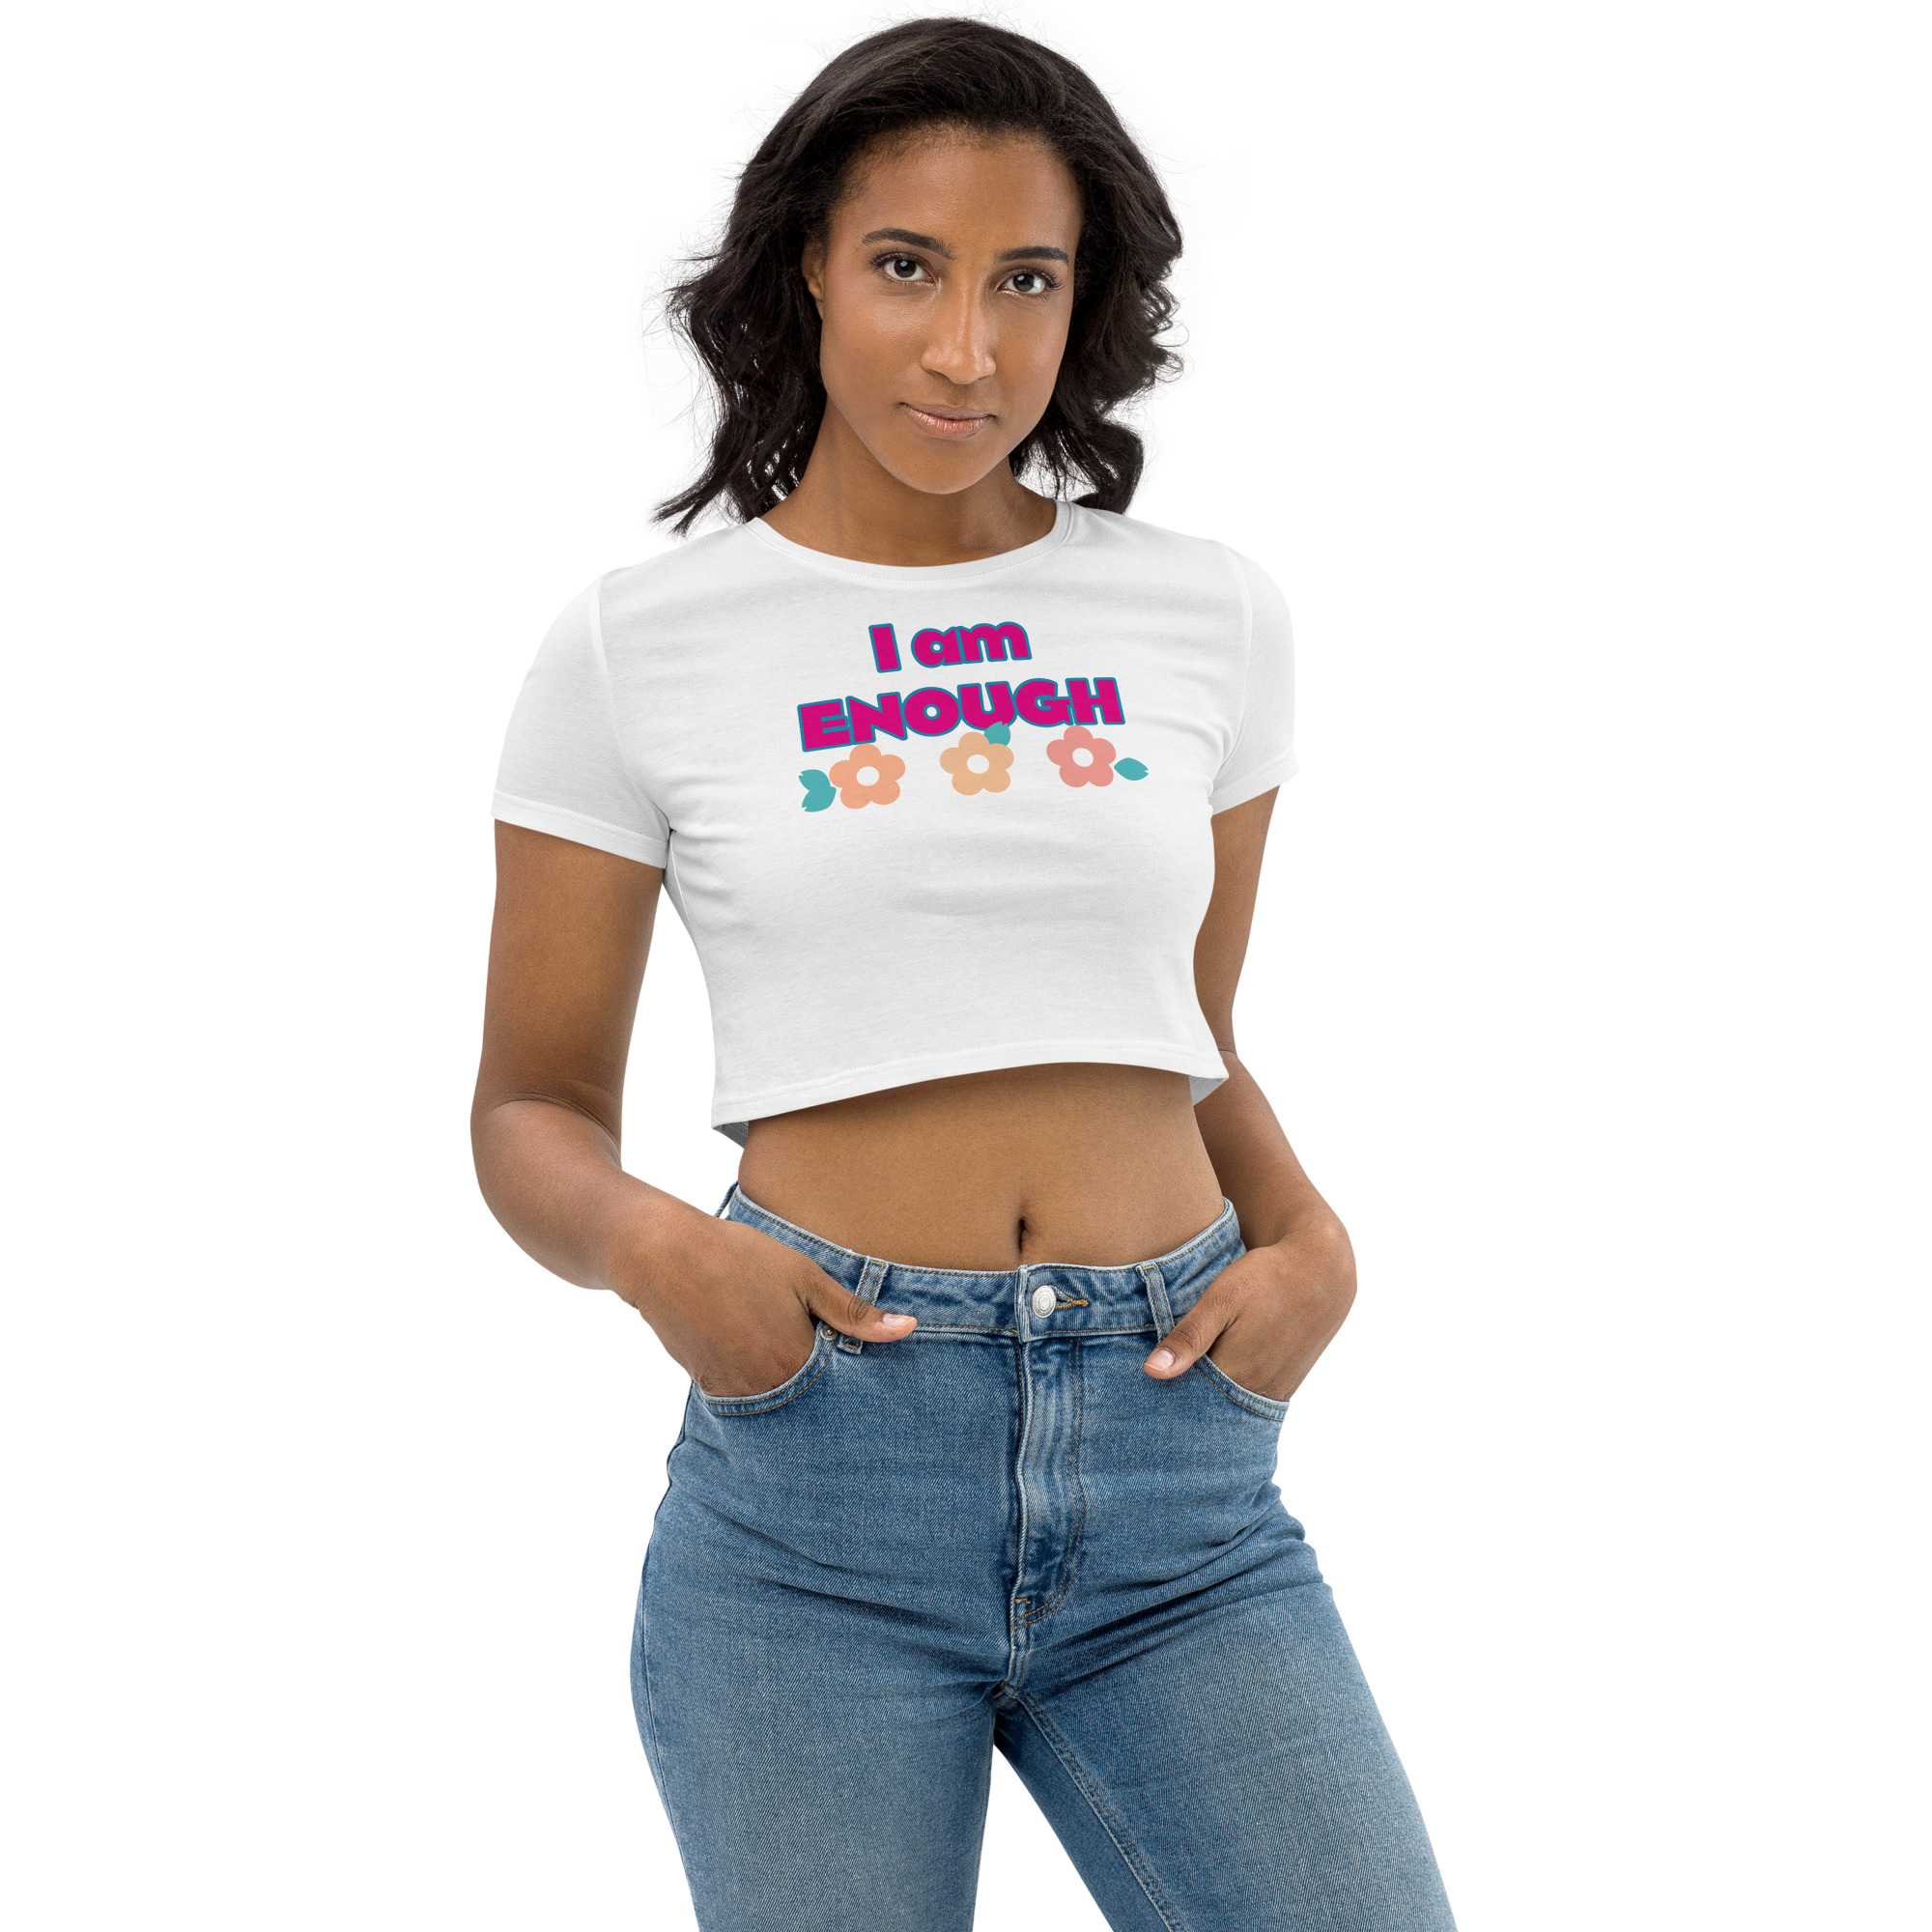 Organic Crop Top - I AM ENOUGH - T'inspire You Designs And Collections